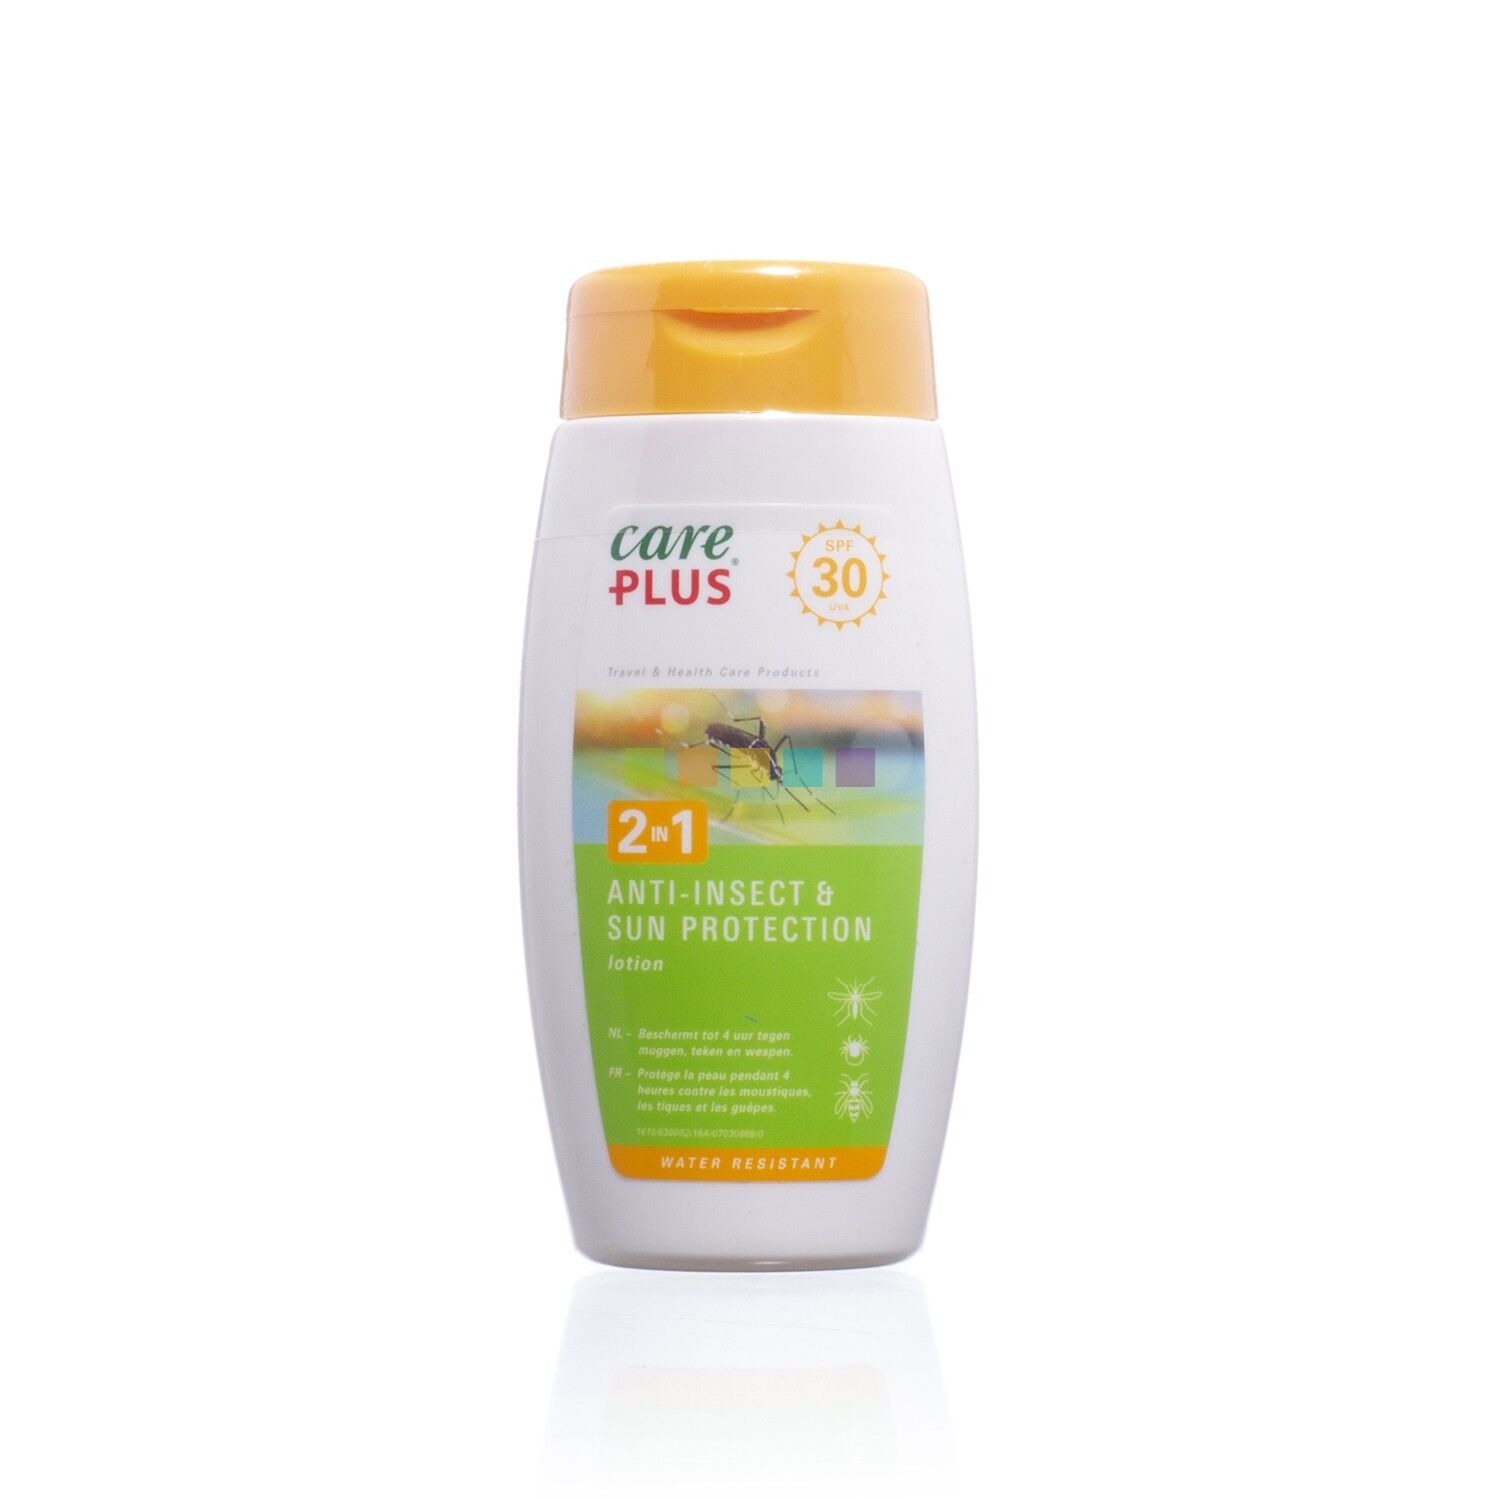 Care Plus 2in1 Anti-Insect & Sun Protection Lotion SPF30 - Repelenty proti hmyzu | Hardloop